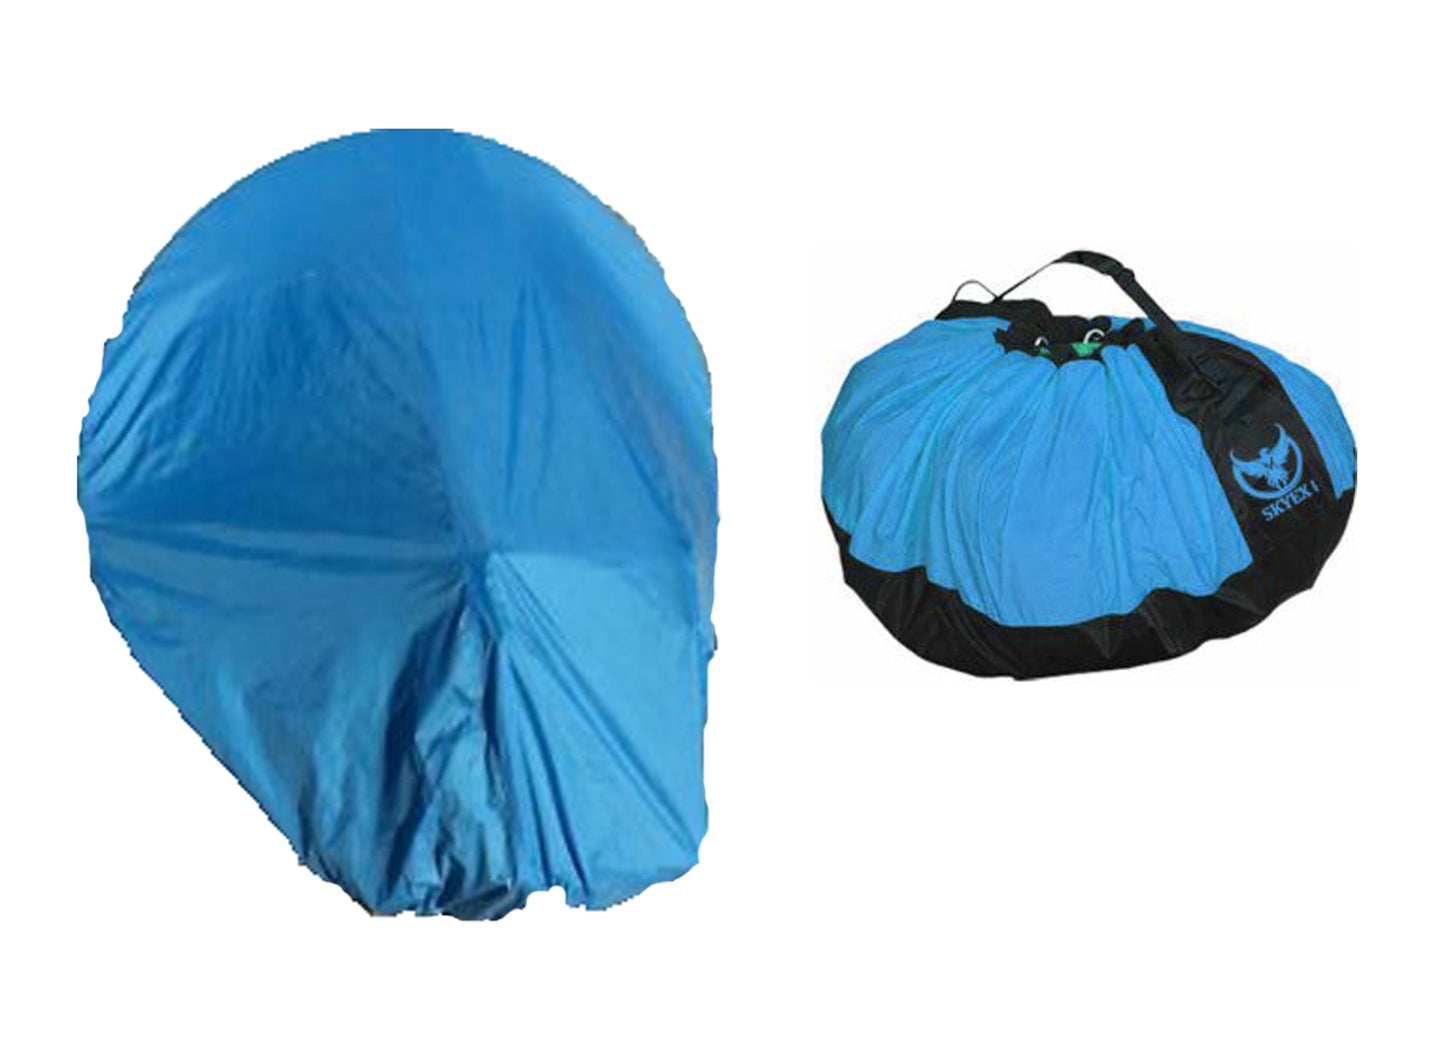 Paragliding Quick Bag | Best Paramotor Dust Cover-0001 | Skyexsuits